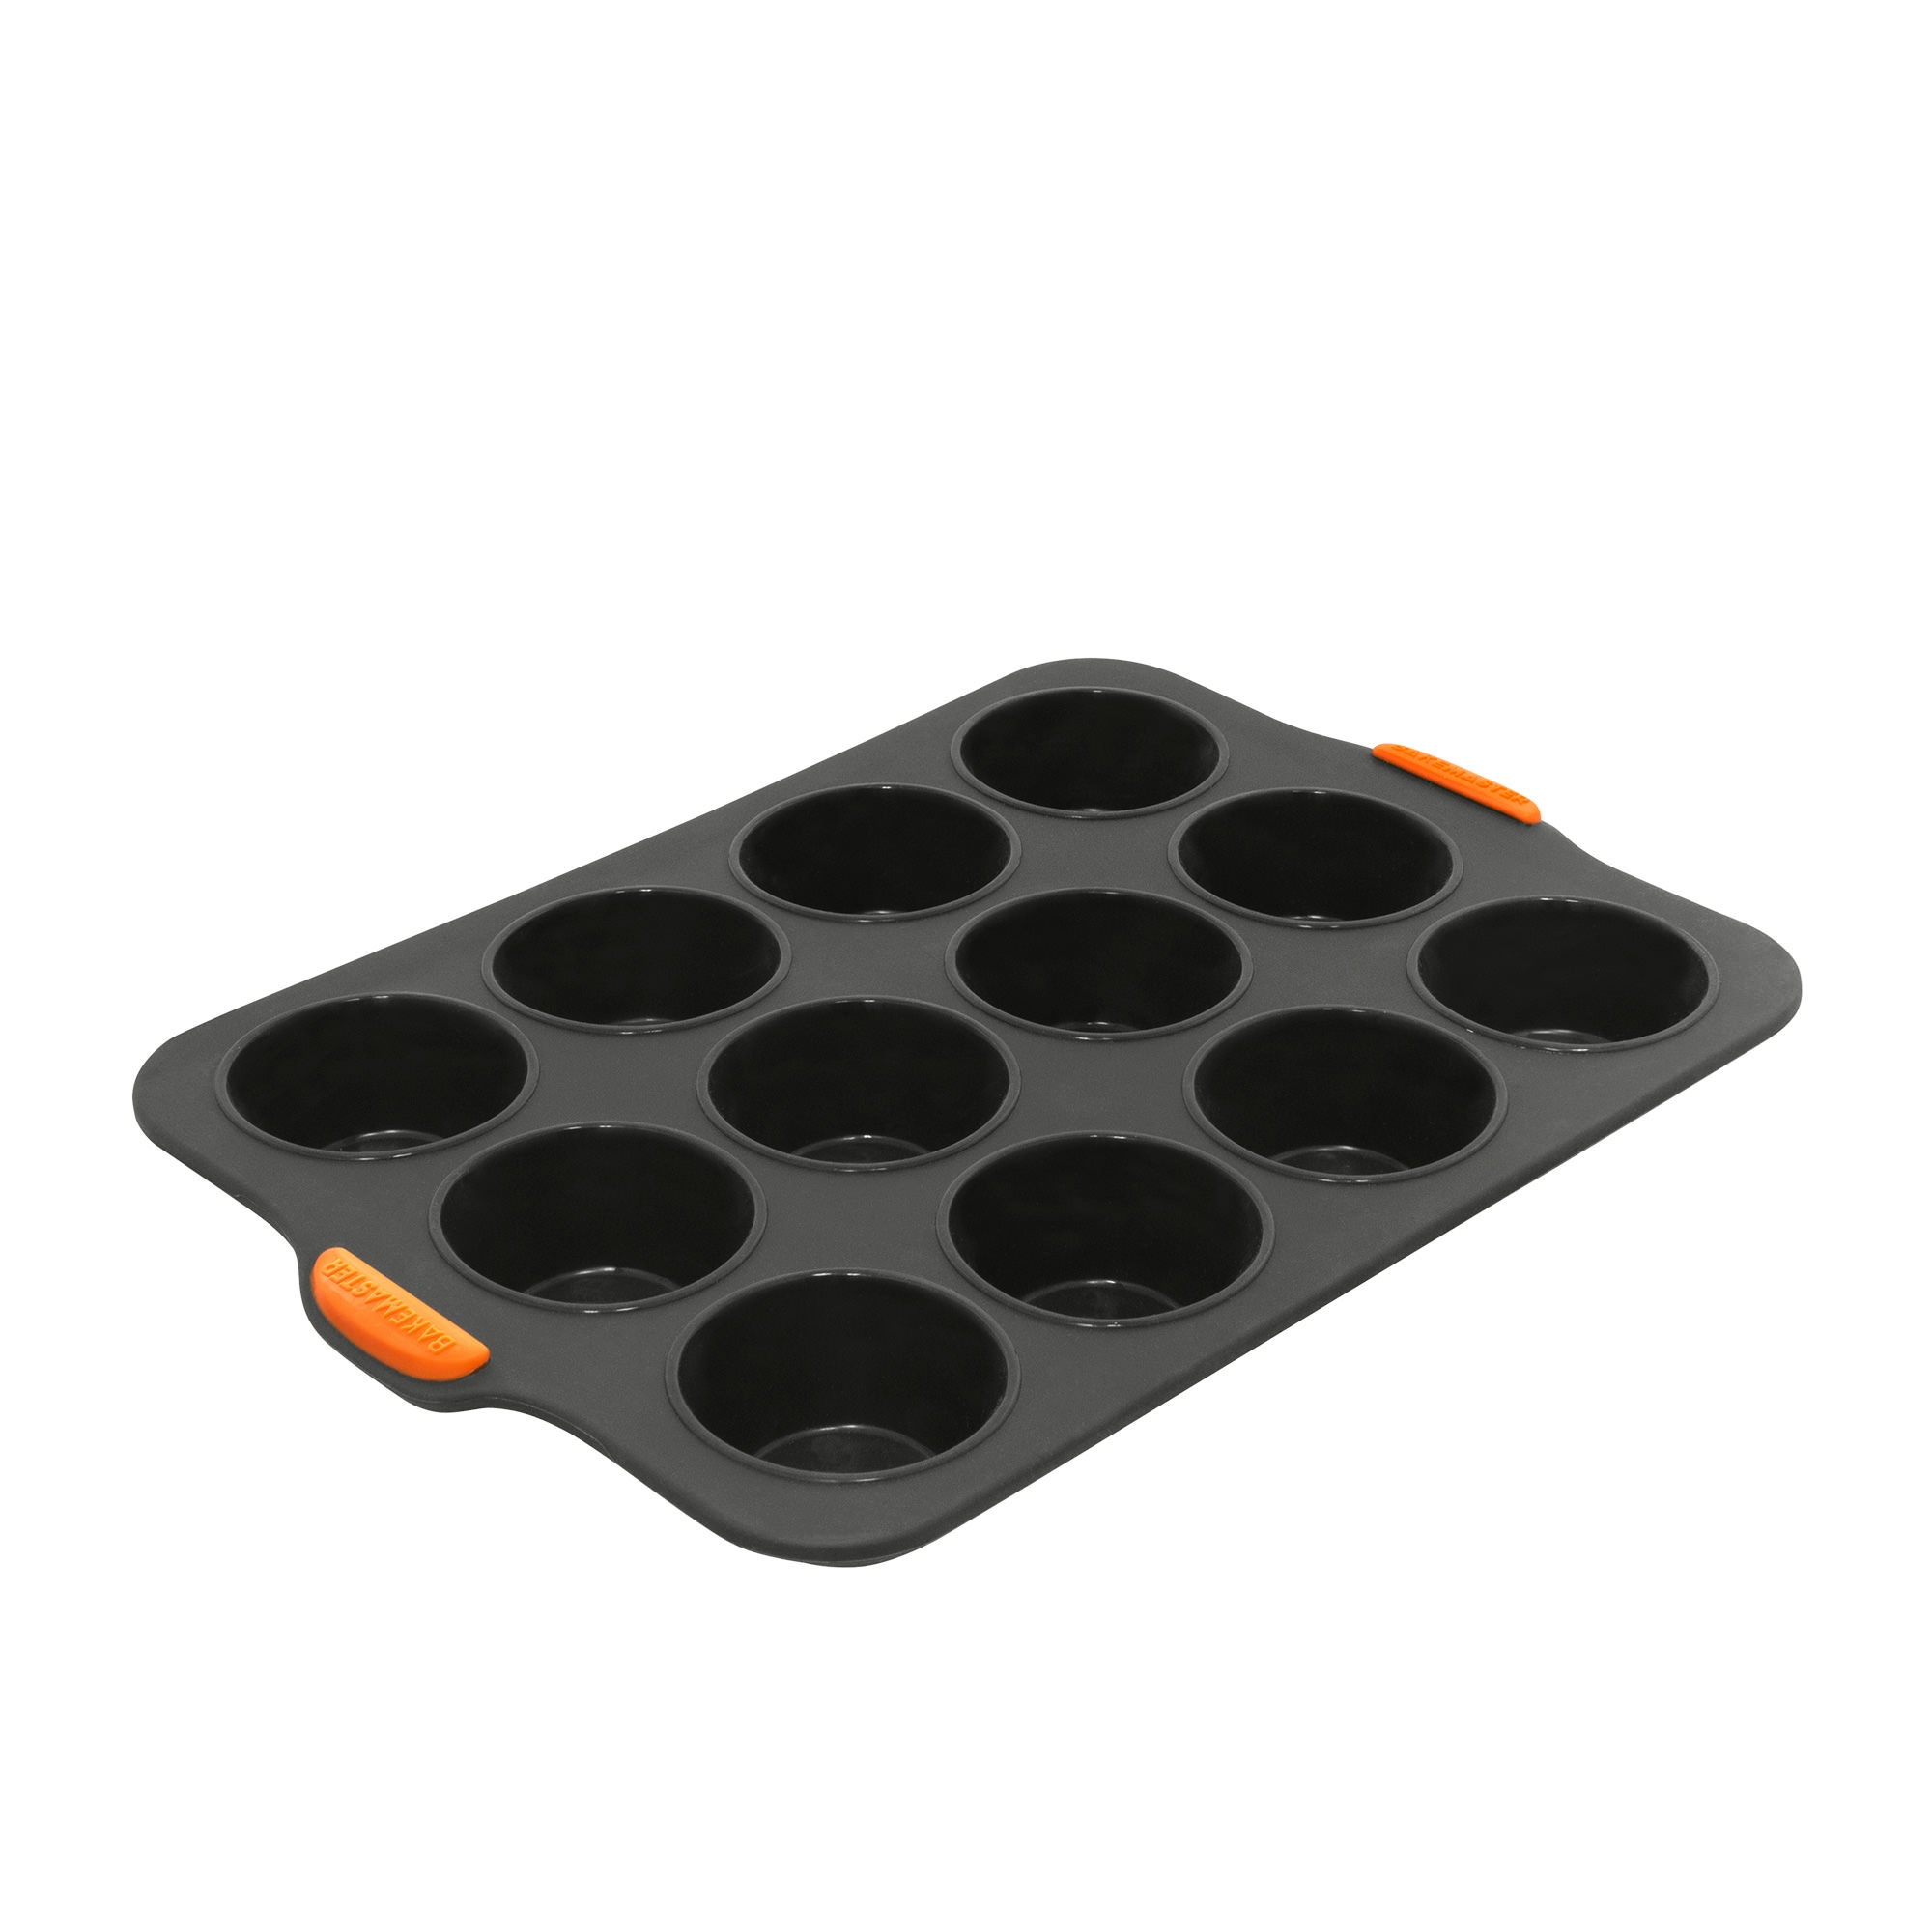 Bakemaster Silicone Muffin Pan 12 Cup Image 1